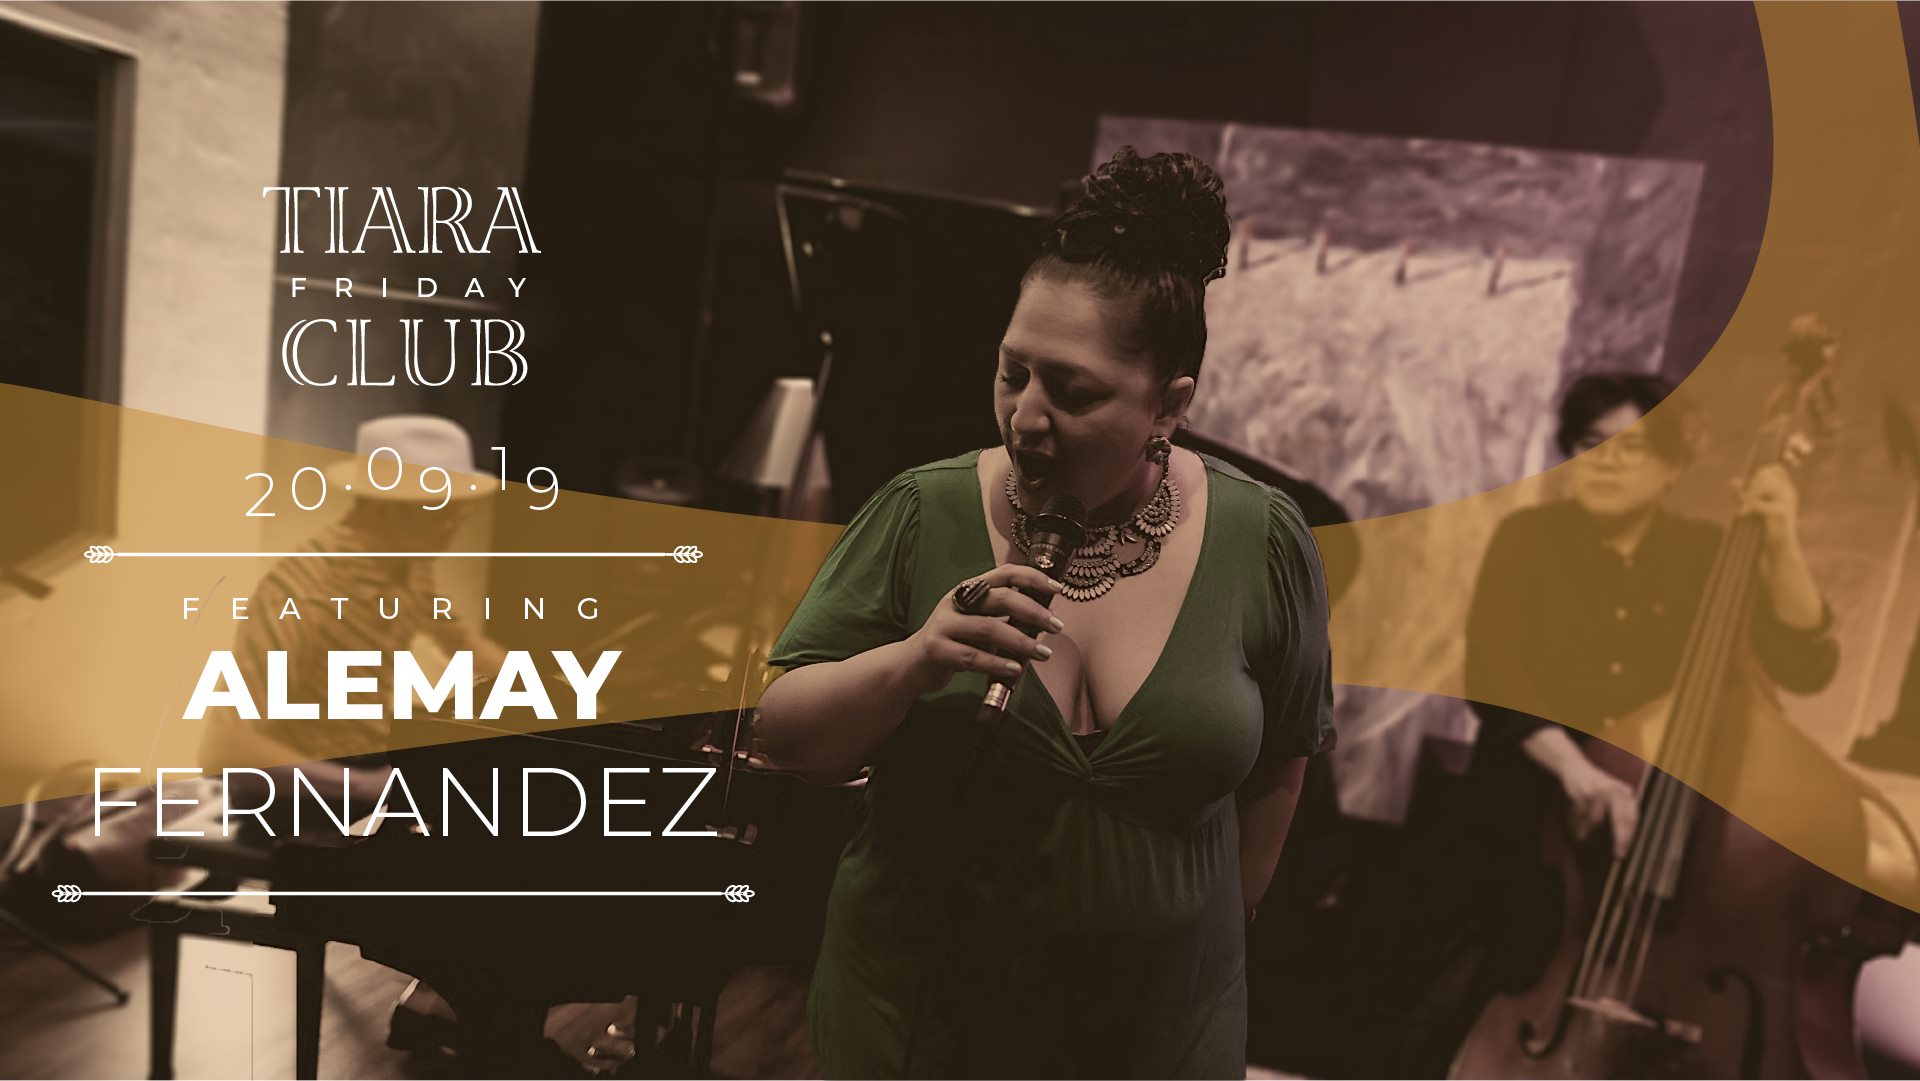 TIARA FRIDAY CLUB featuring ALEMAY FERNANDEZ - City Nomads